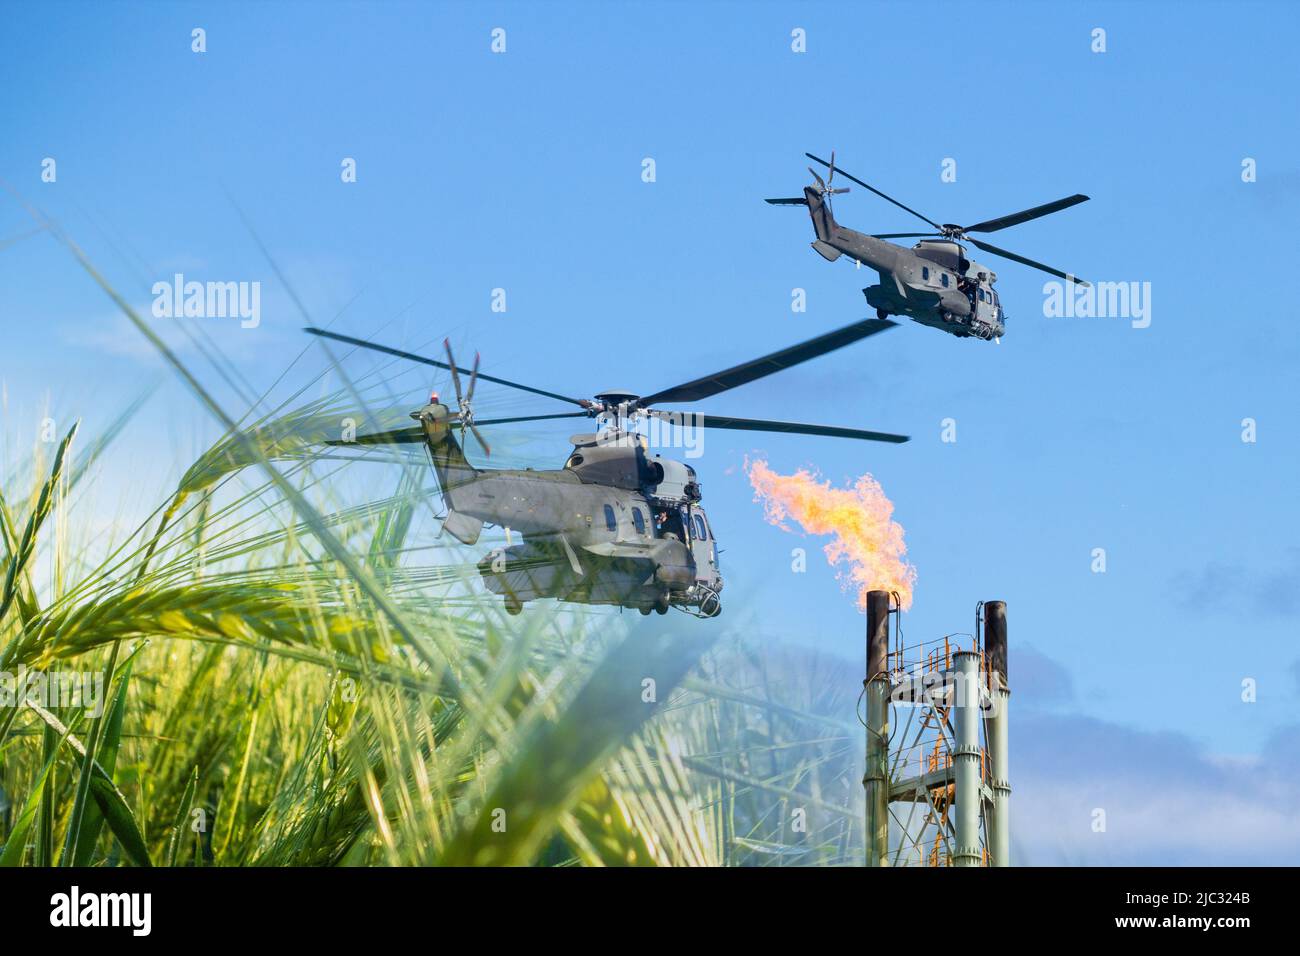 Military helicopters flying over wheat field and gas plant chimney. Concept image: Ukraine Russia conflict, wheat, food shortage, Russian sanctions... Stock Photo